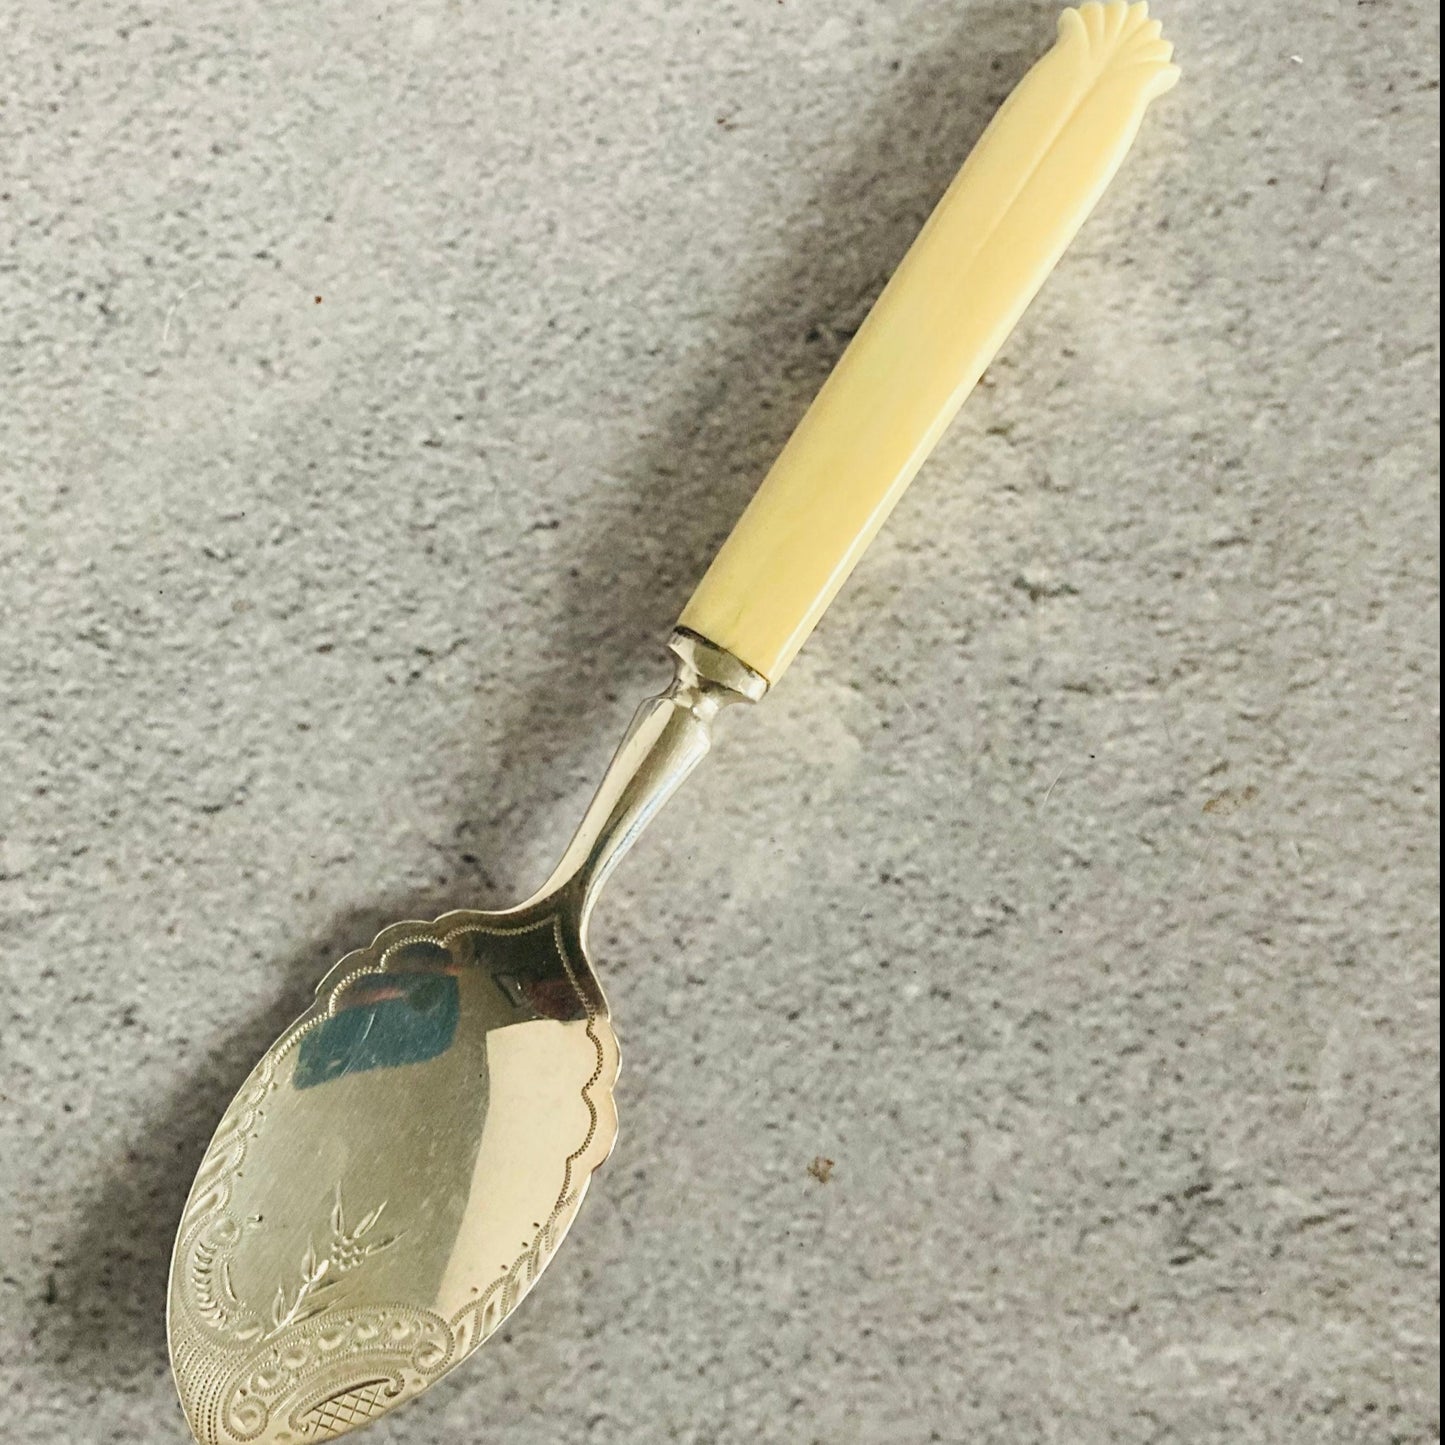 The Headhunter Jodie - Antique Sterling Silver and Bone Preserve Spoon